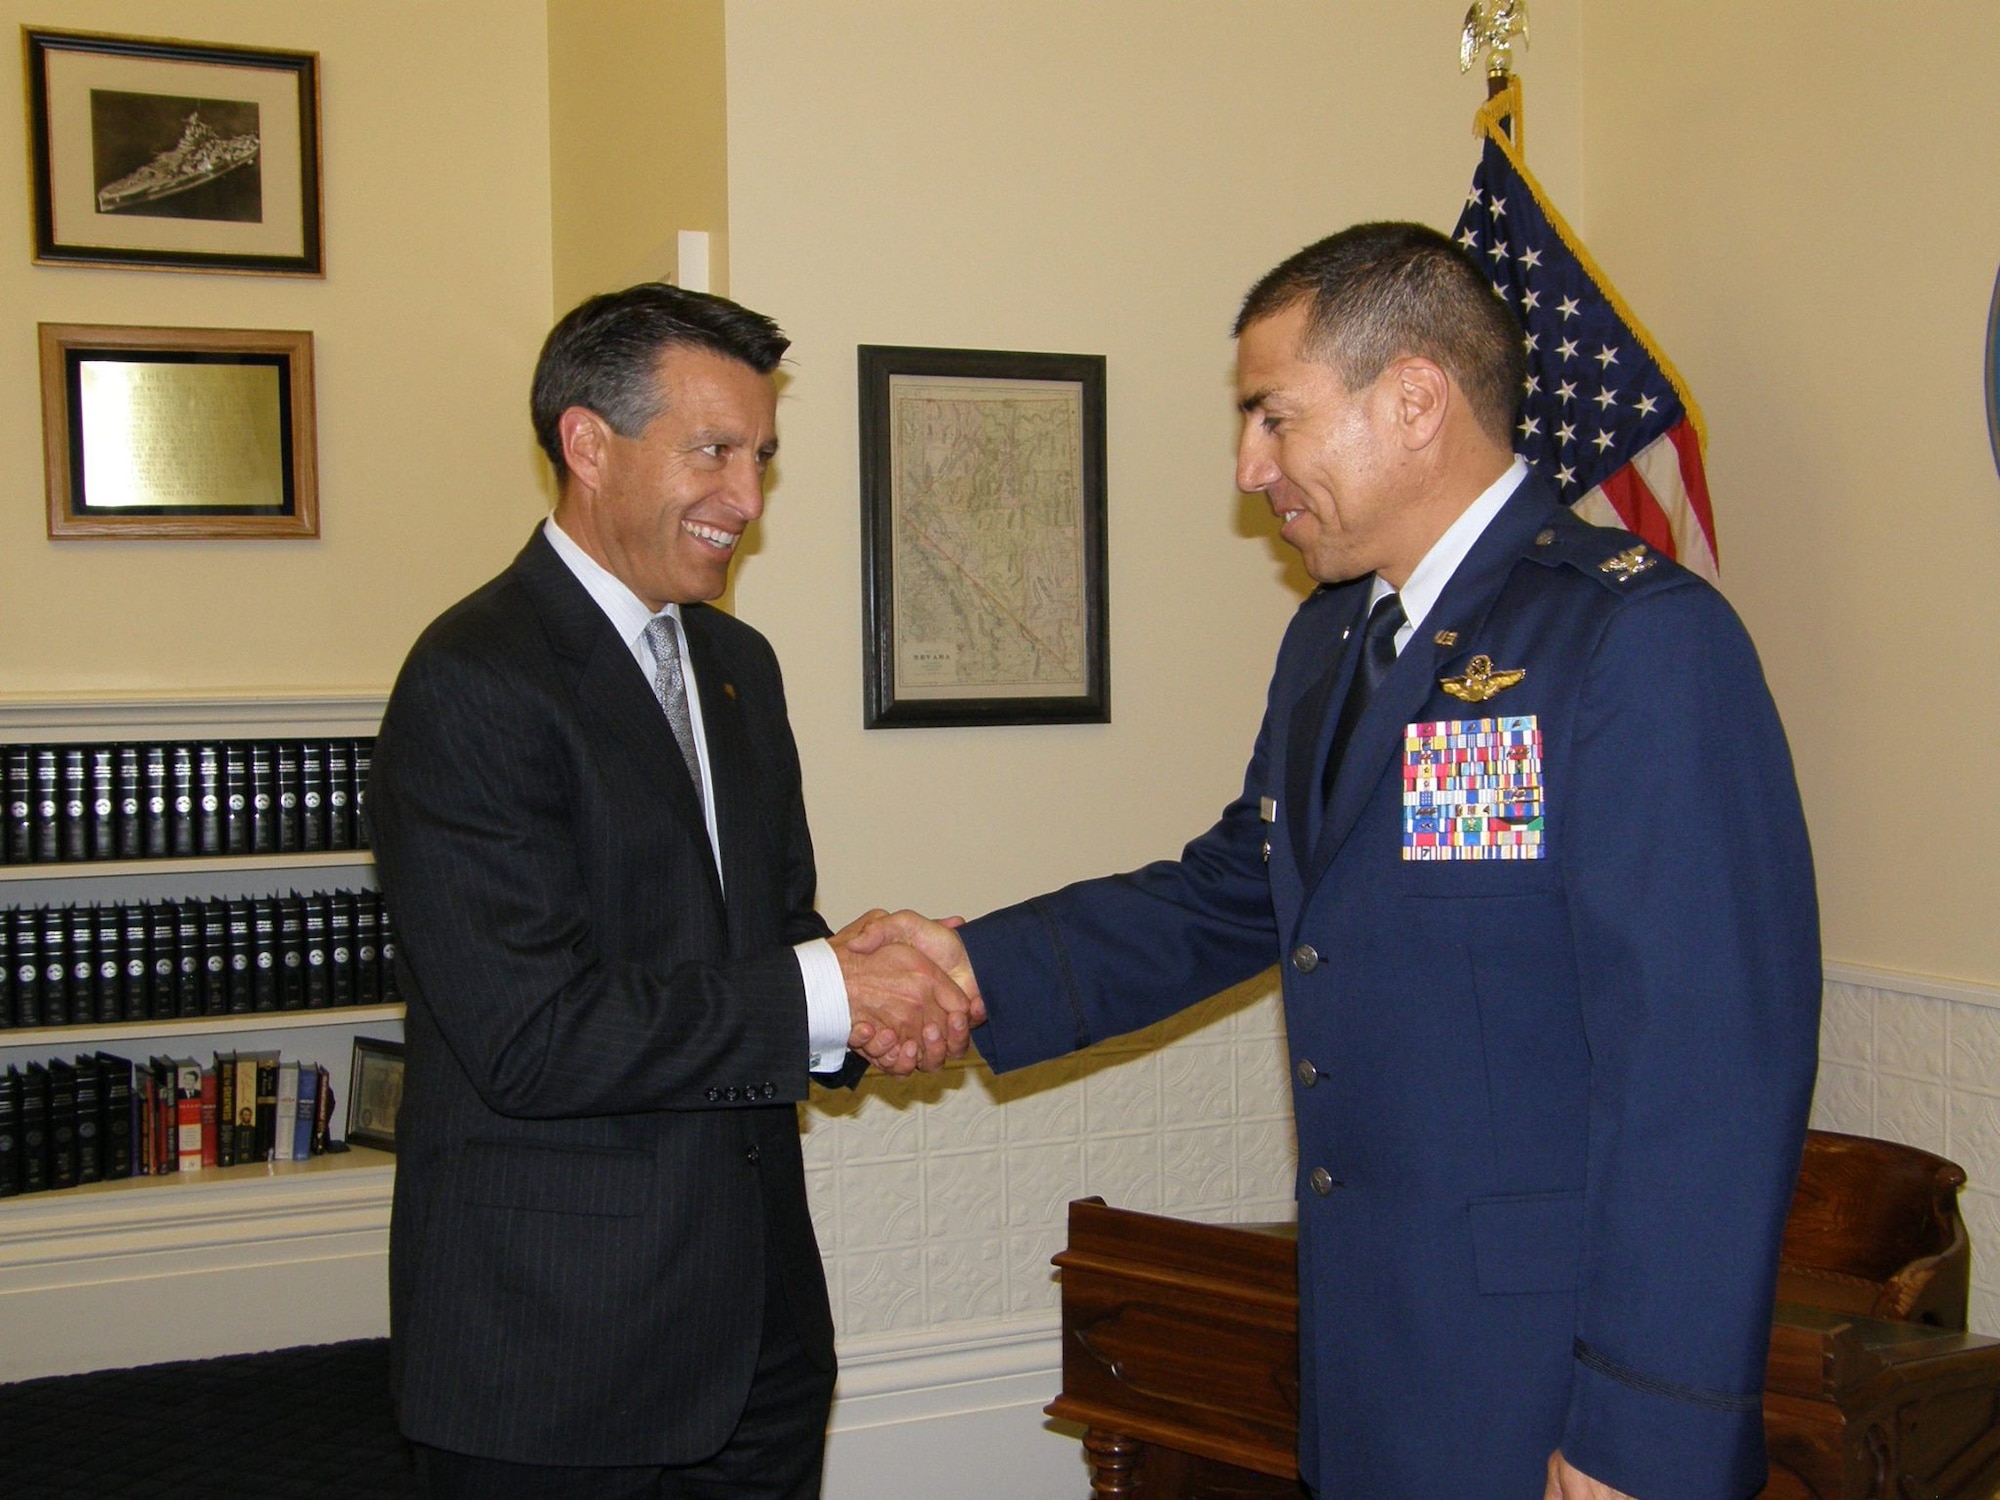 Gov. Brian Sandoval, left, congratulates Col. Caesar Garduno after Garduno was promoted to colonel at a promotion ceremony at the Capitol on Friday.

Photo by Lt. Col. Terry Conder, Joint Force Headquarters Public Affairs
